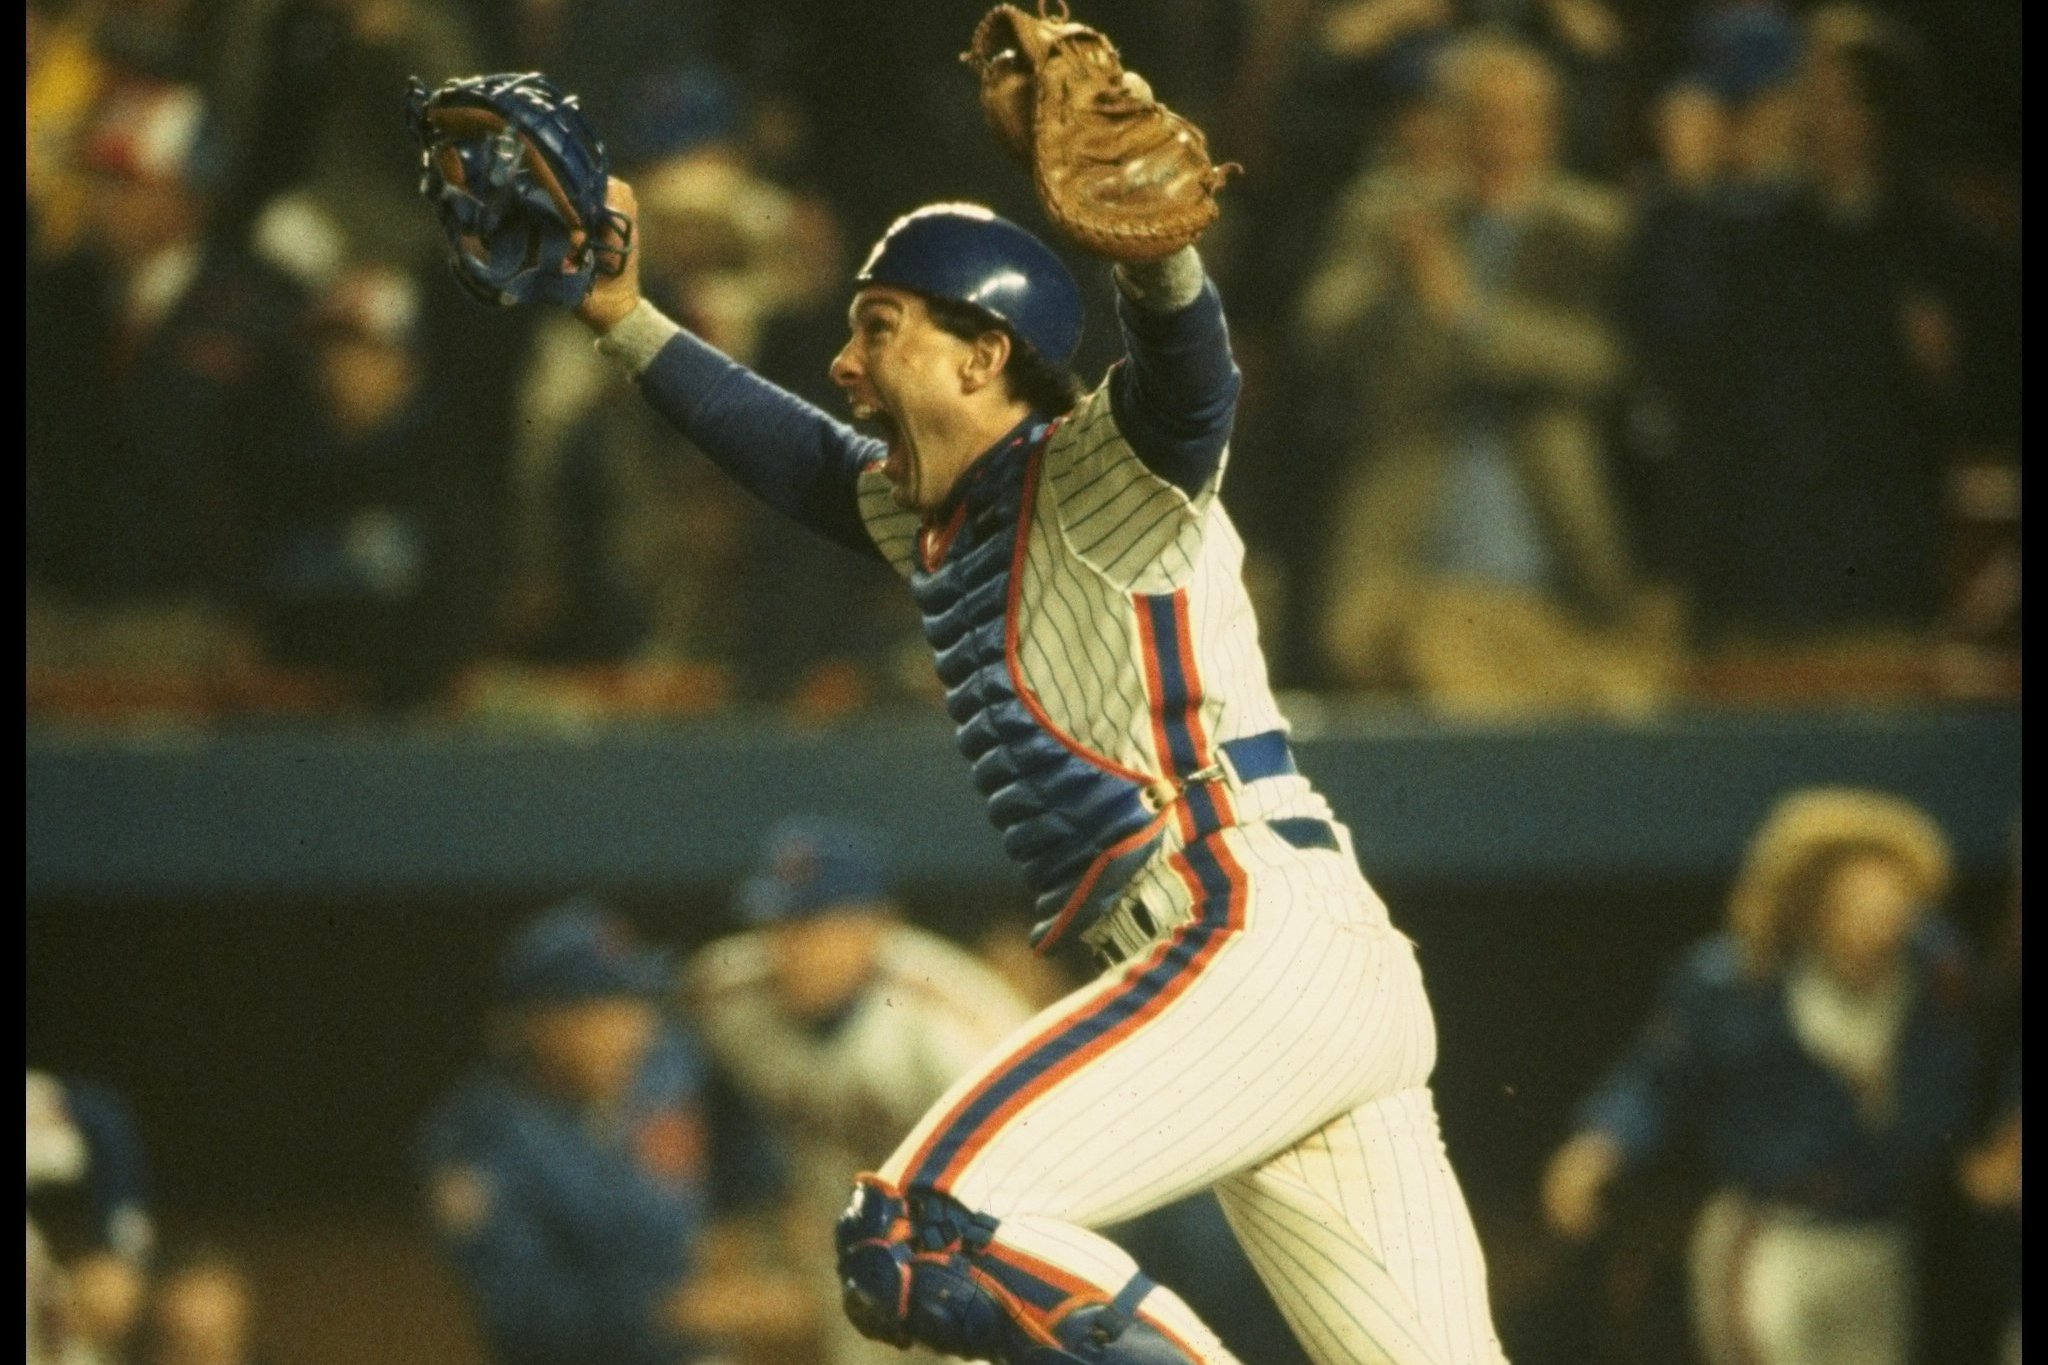 Keith Hernandez and Gary Carter Editorial Photography - Image of